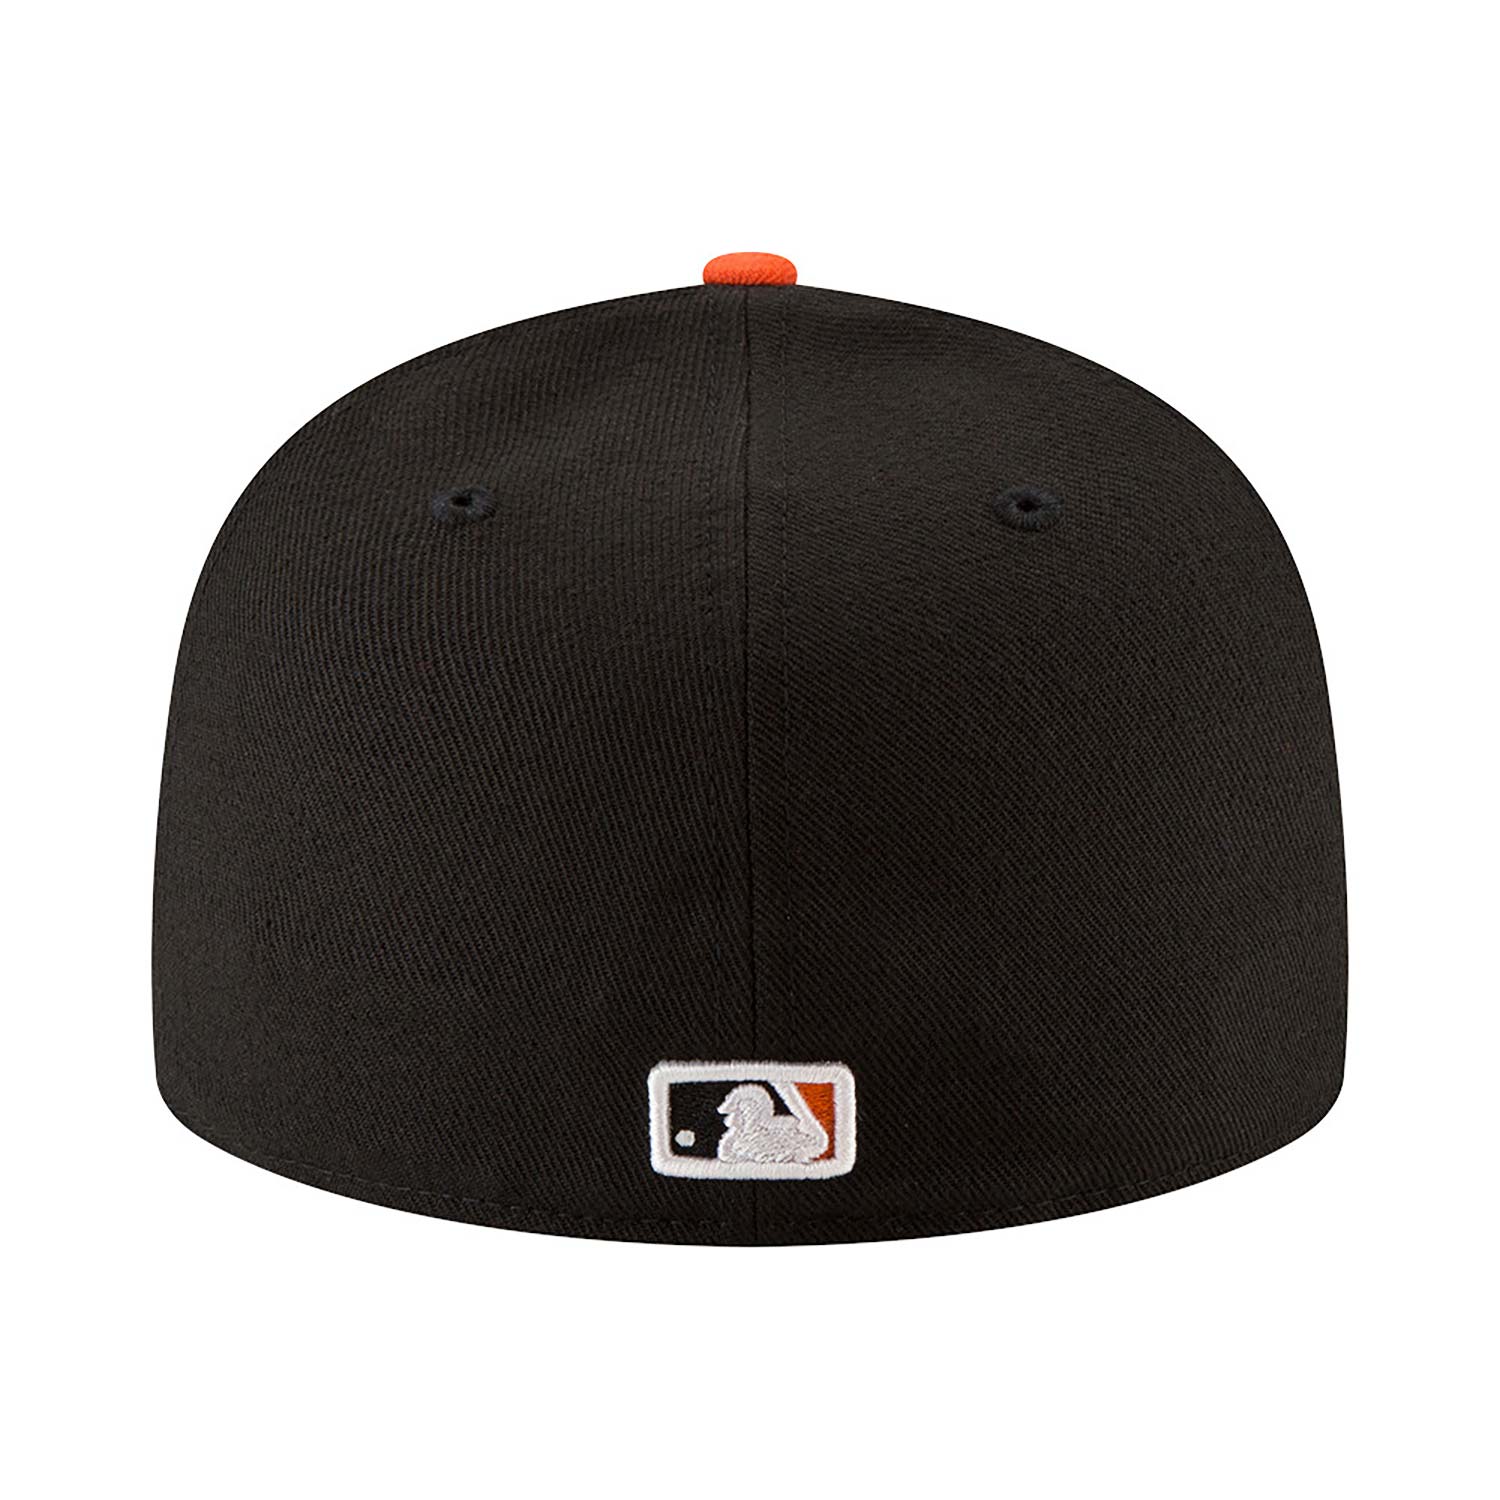 San Francisco Giants Authentic On Field Game Black 59FIFTY Cap